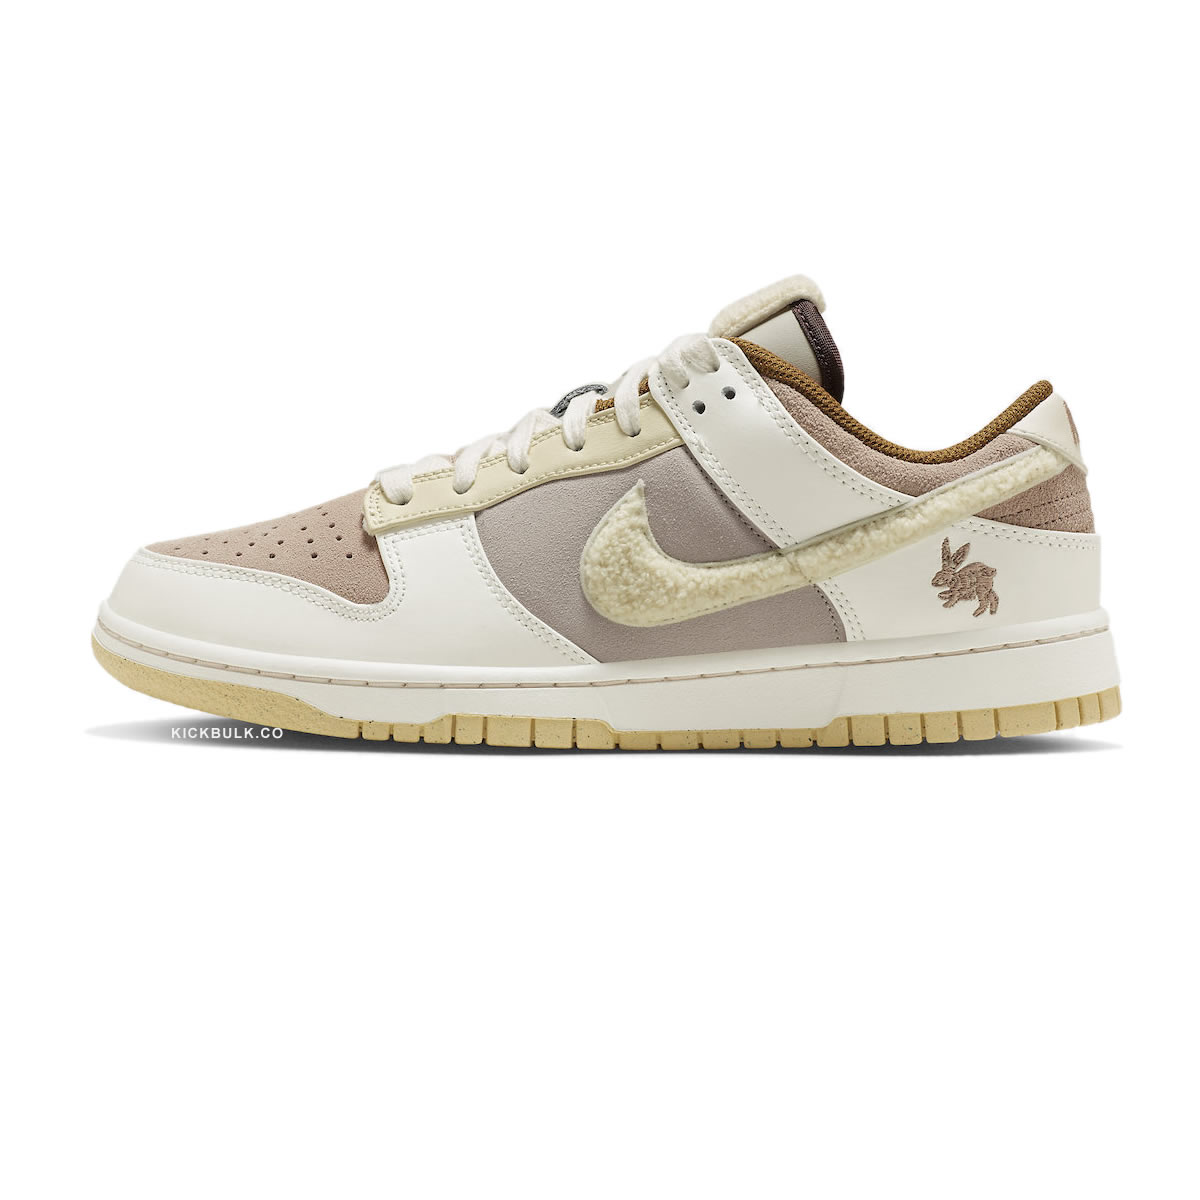 Nike Dunk Low Year Of The Rabbit White Taupe Fd4203 211 1 - www.kickbulk.co